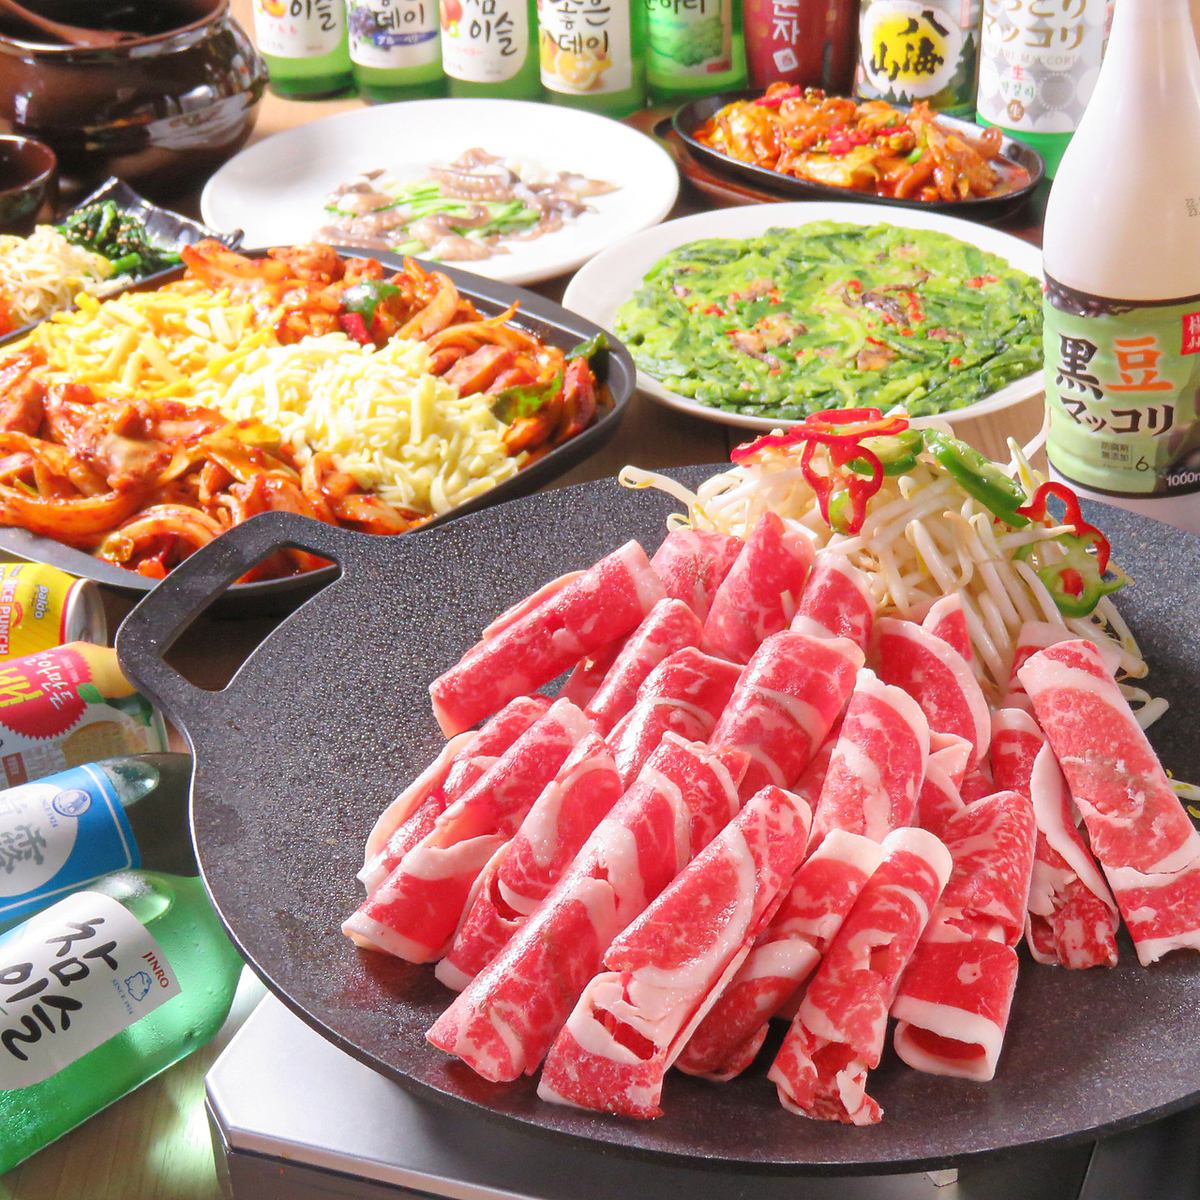 All-you-can-drink is available! Enjoy Korean cuisine to your heart's content